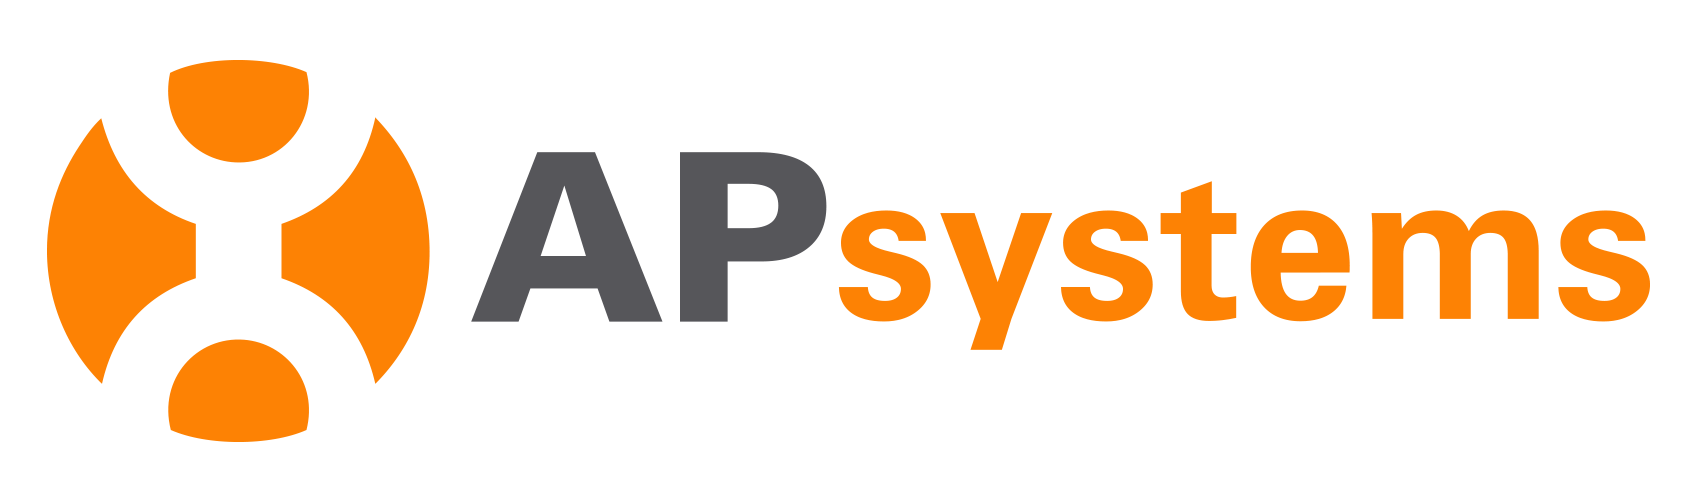 APsystems Canada |  The global leader in multi-platform MLPE technology